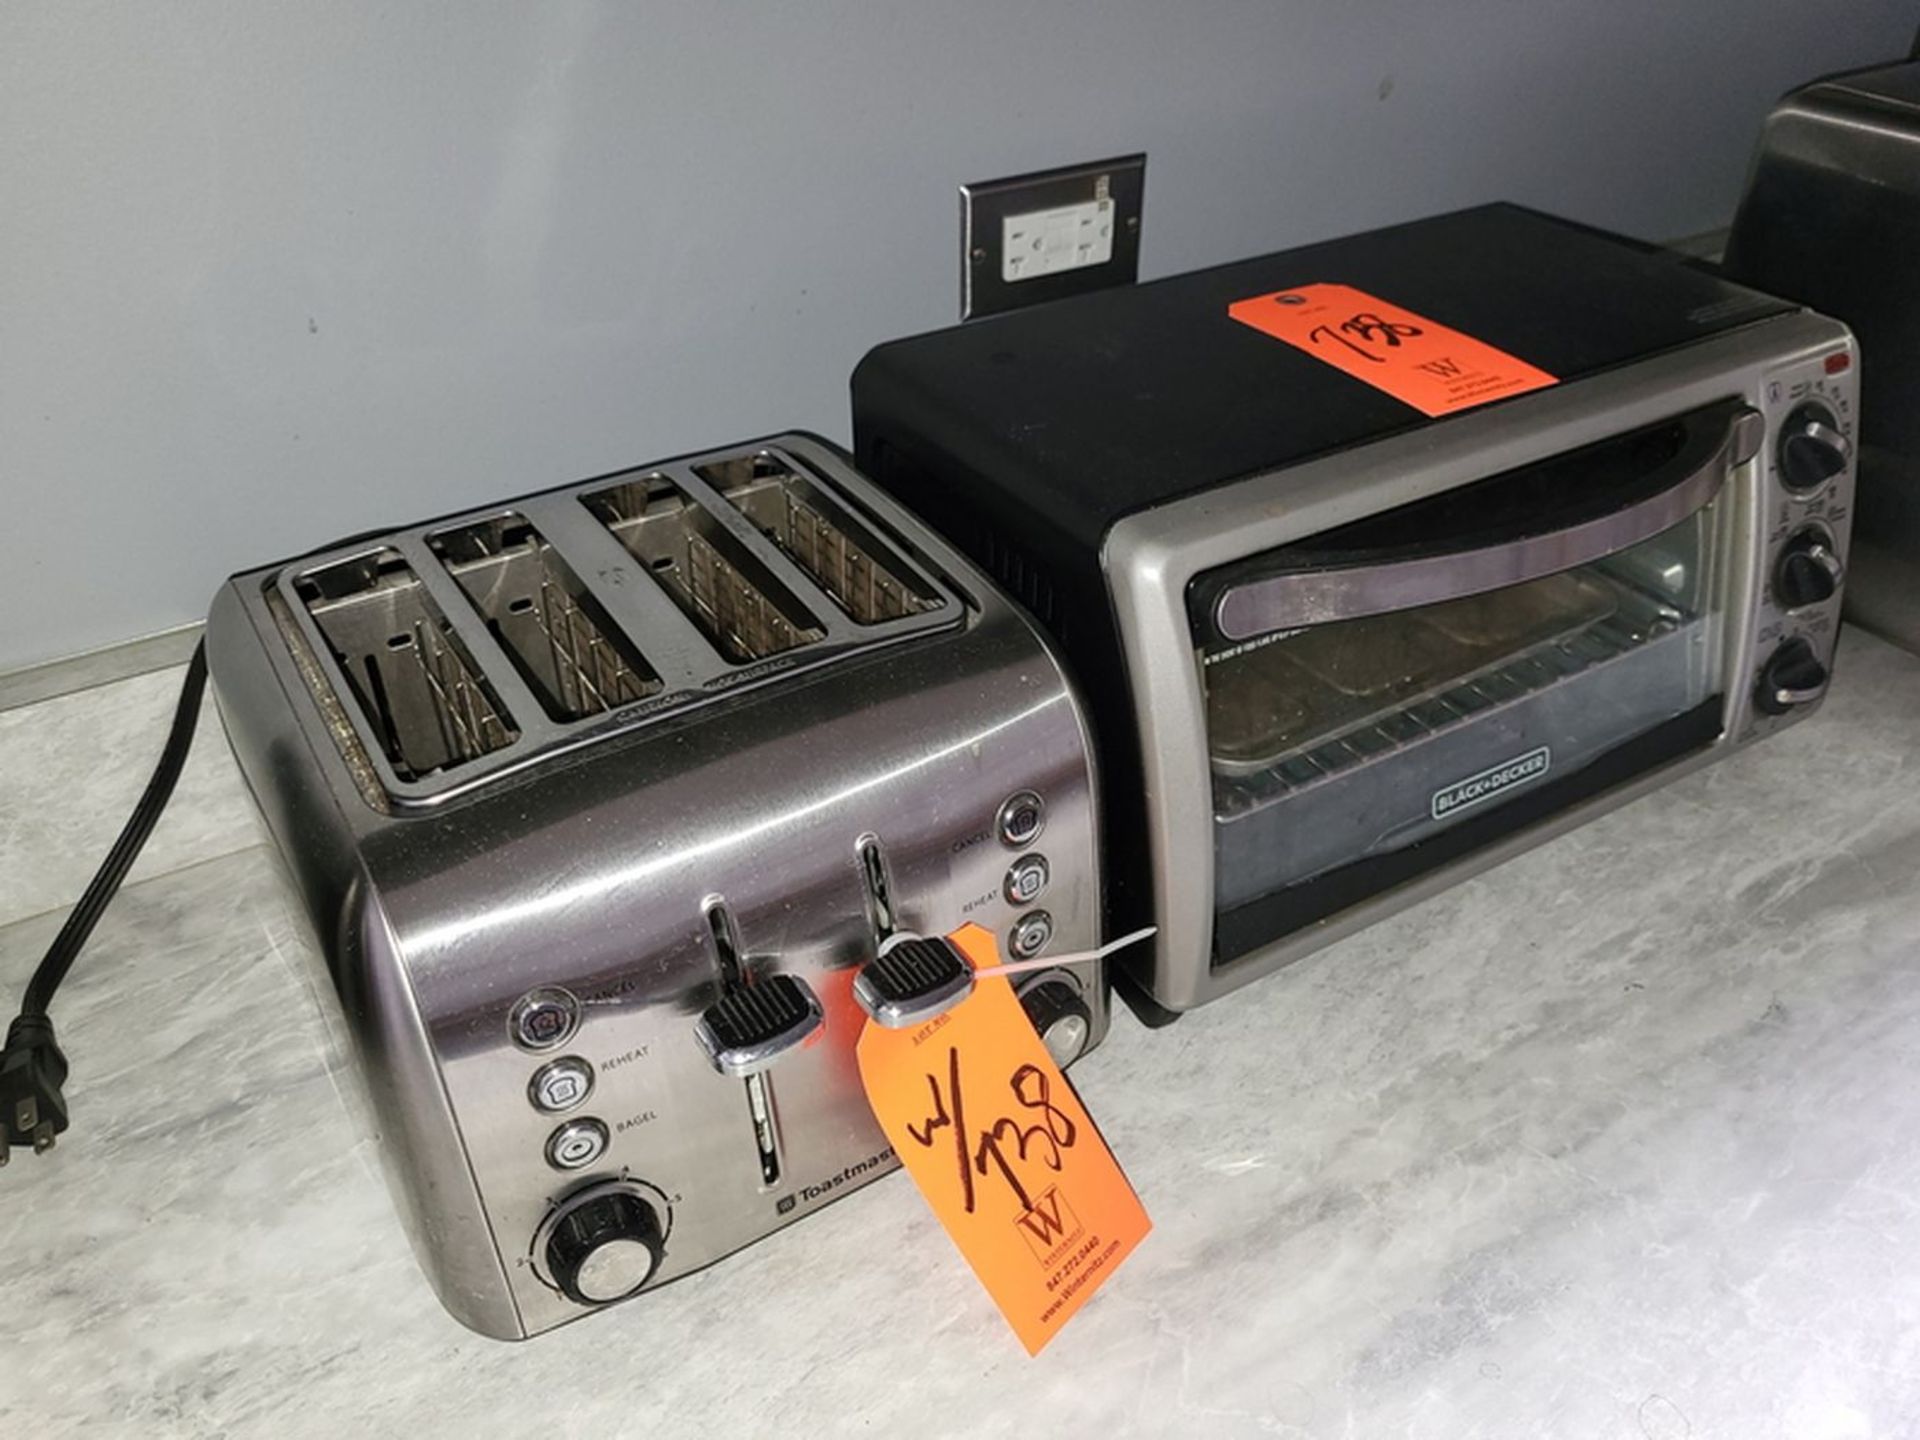 Lot - (1) Black & Decker Model TO1313SBD Toaster Oven, and (1) Toastmaster Toaster - Image 2 of 2